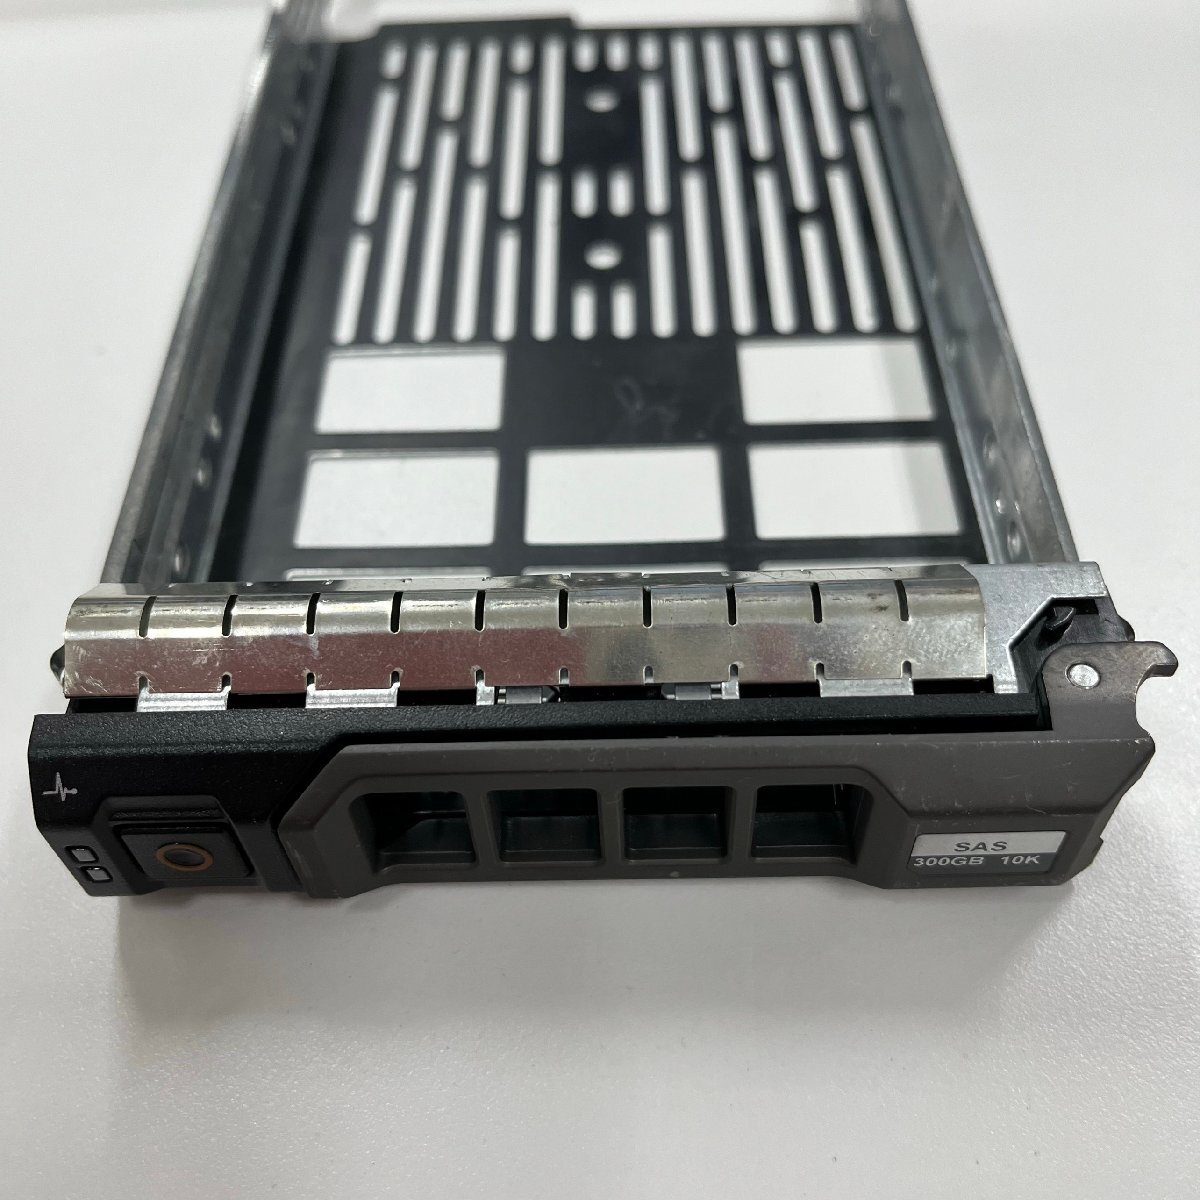 Dell PowerEdge server for 3.5 -inch HDD Cade . tray (0F238F)2.5 -inch HDD adaptor attaching * secondhand goods *Q00052